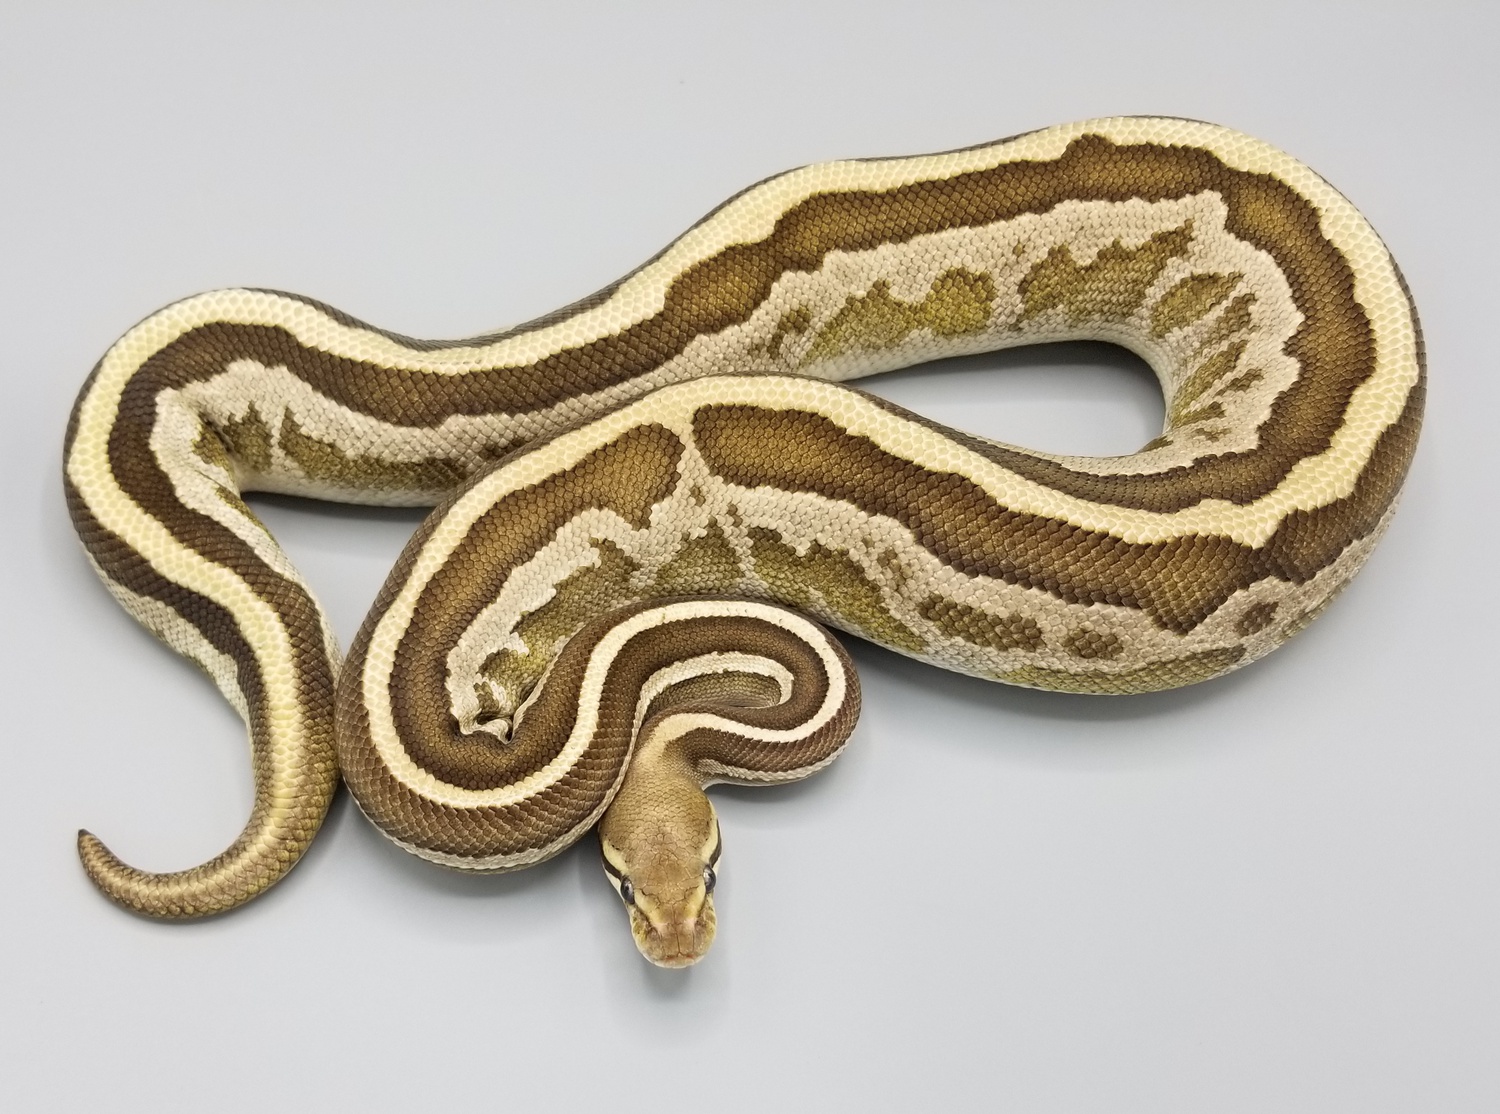 Leopard Mojave Arroyo Fire Ball Python by Milbradt & Caponetto Pythons